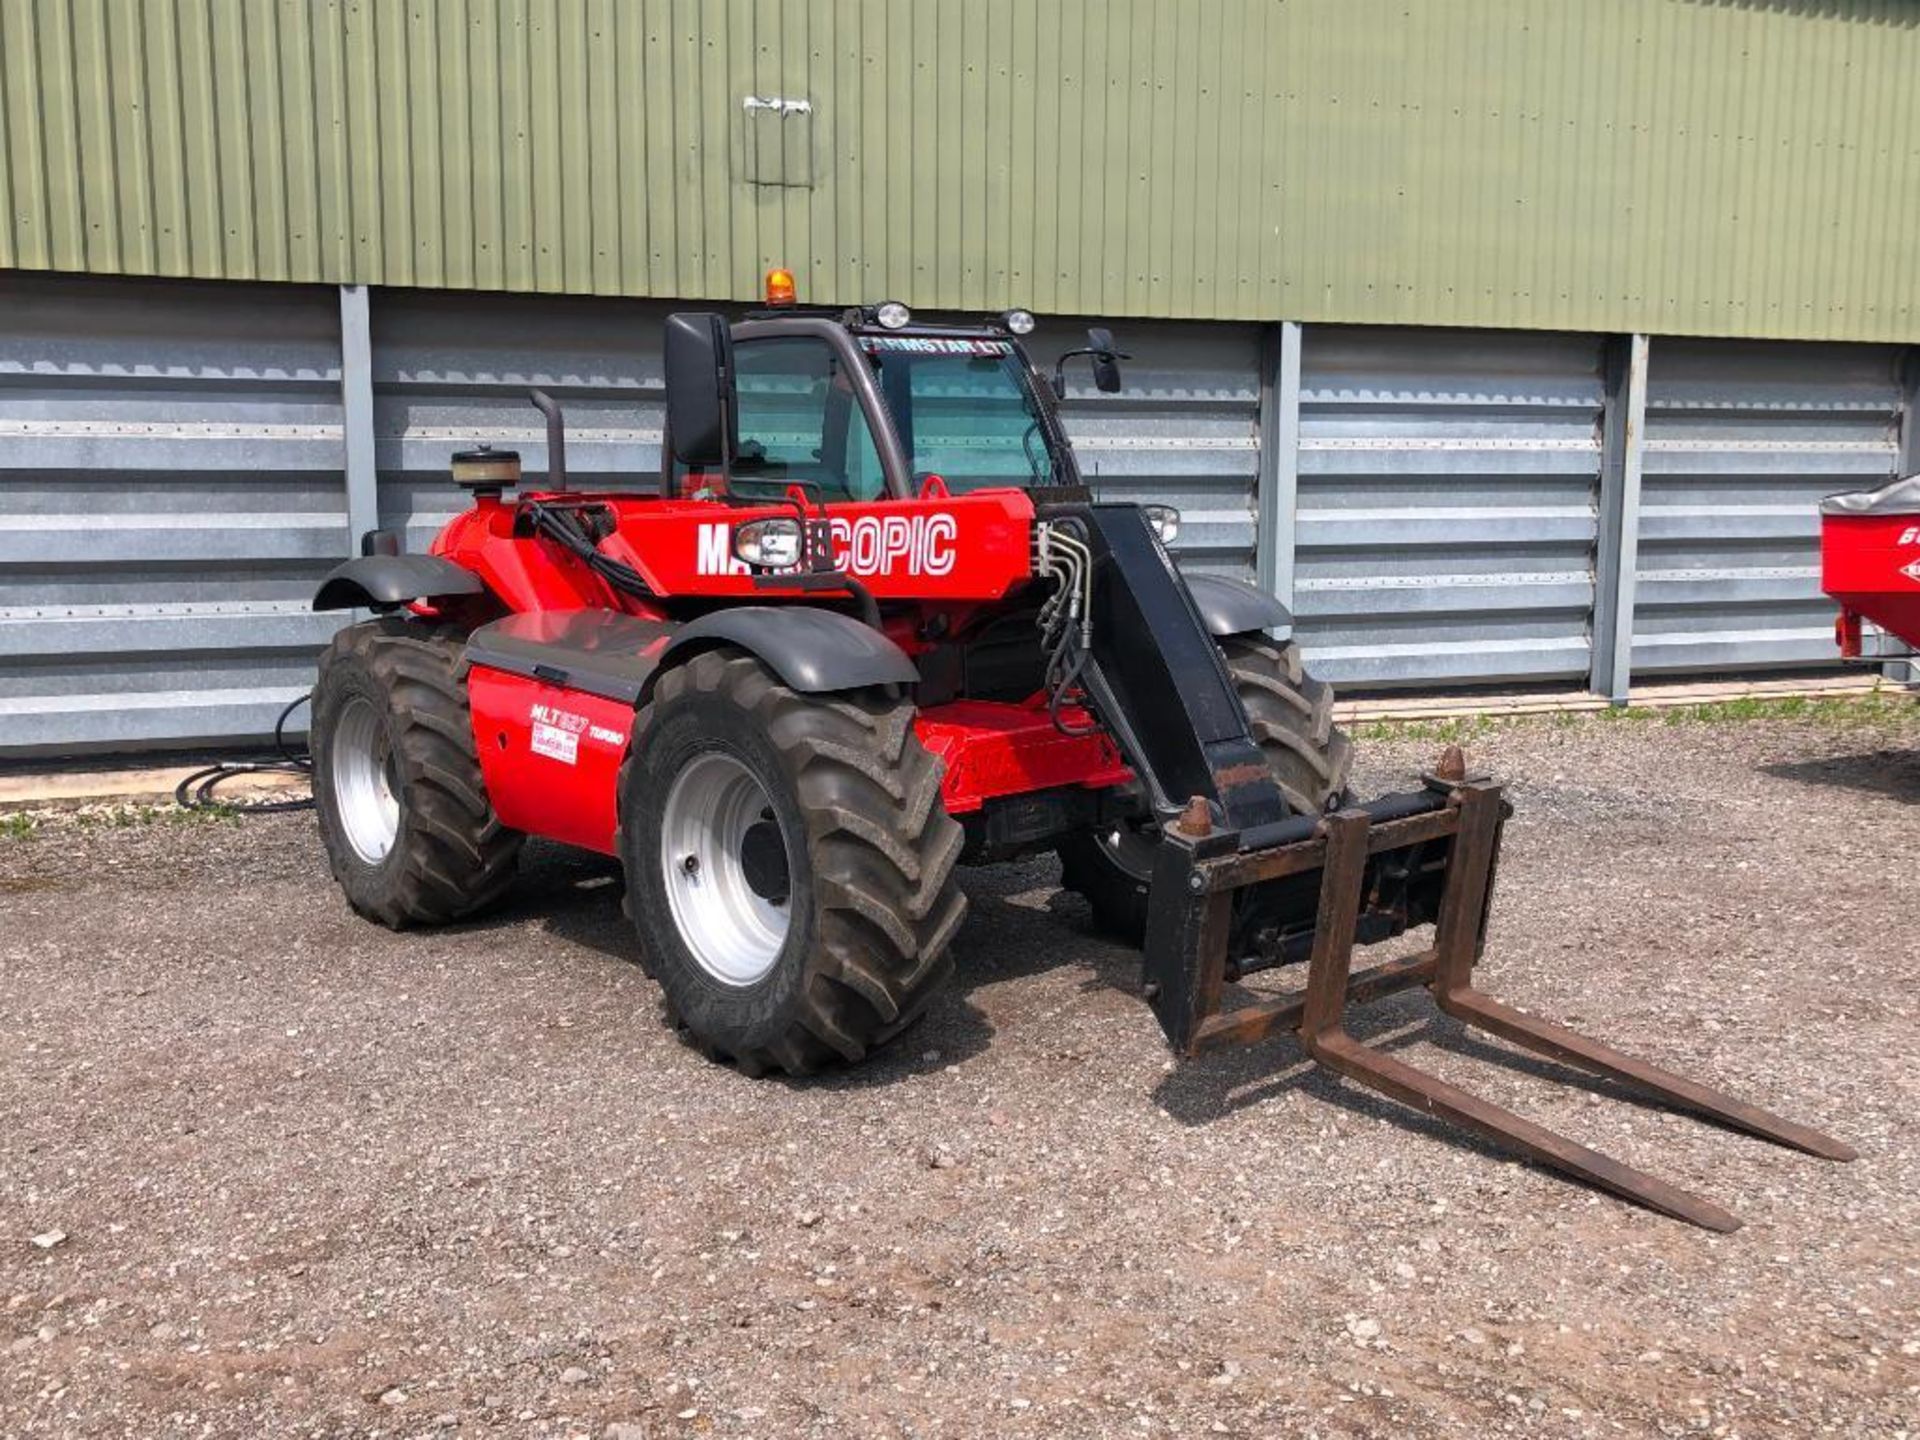 2010 Manitou MLT627 Turbo materials handler c/w air conditioned cab, pick up hitch, pin and cone hea - Image 31 of 47